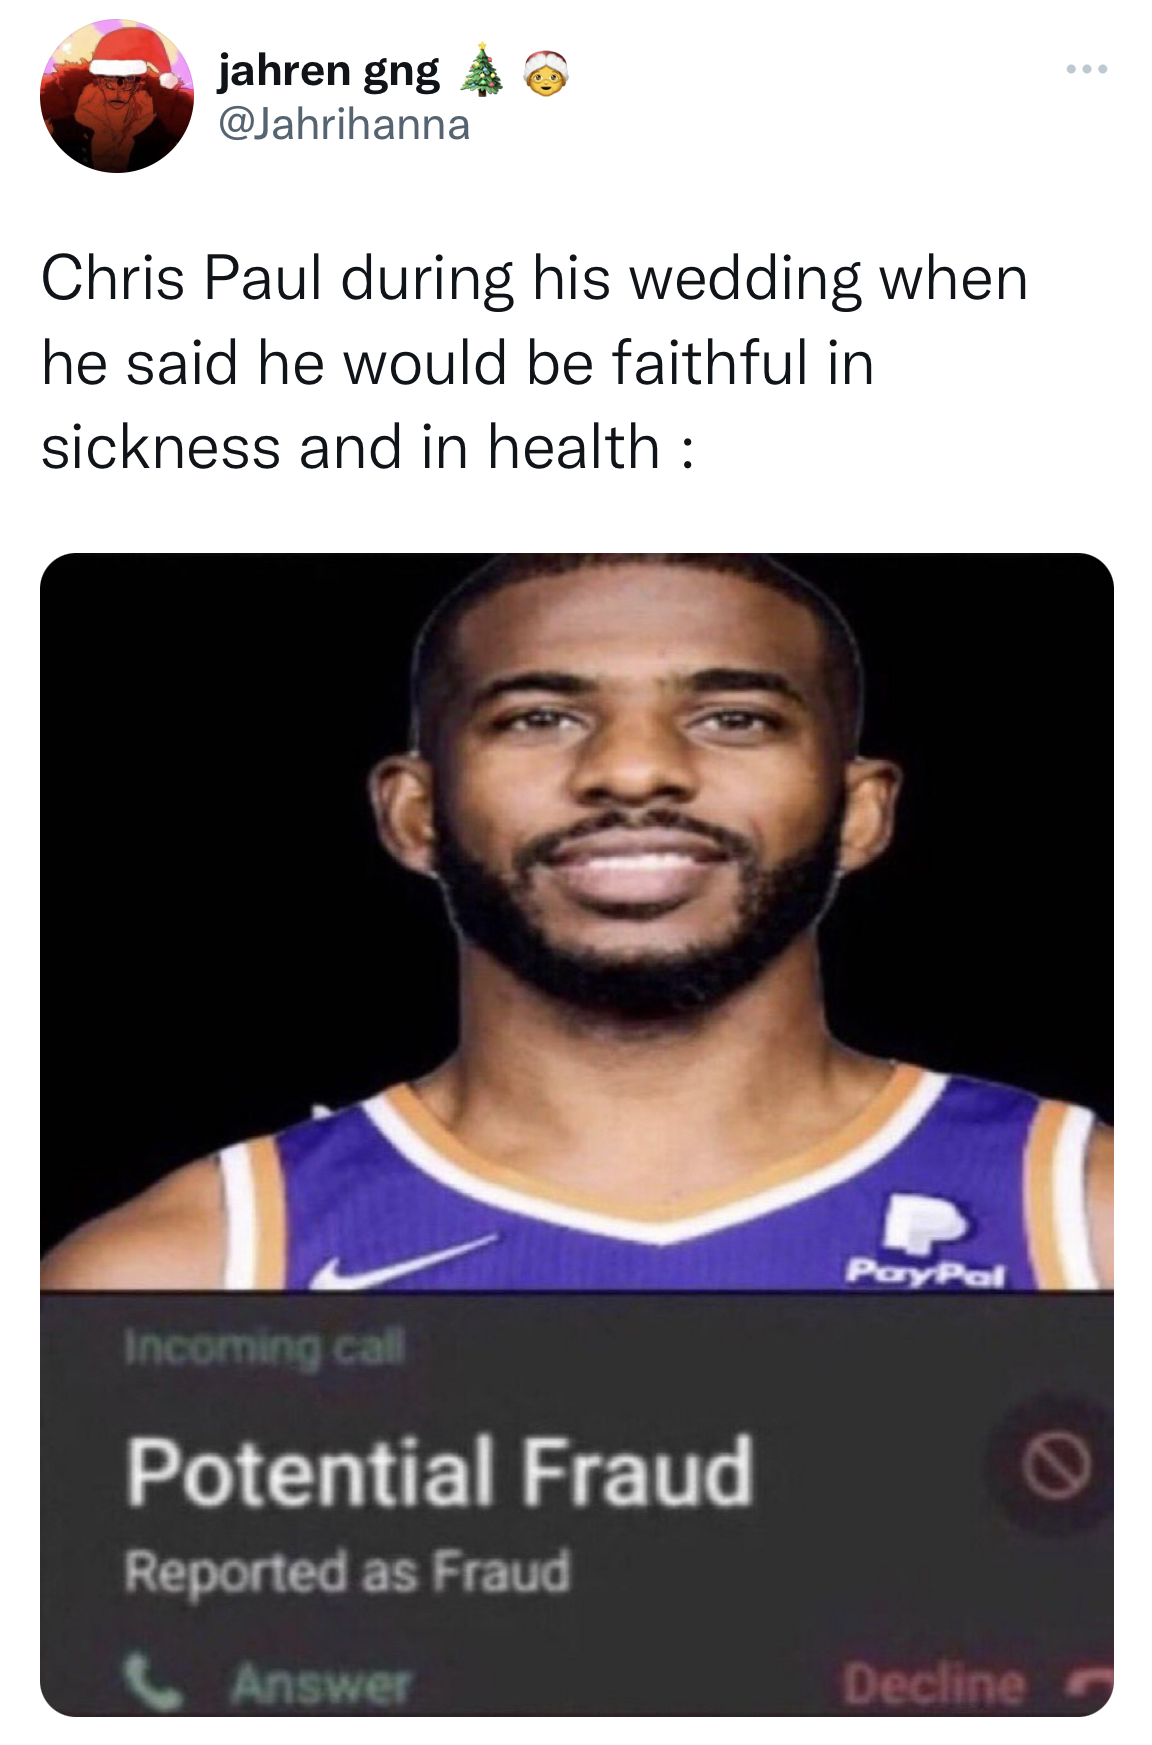 Chris Paul and Kim K memes - potential fraud meme - jahren gng Chris Paul during his wedding when he said he would be faithful in sickness and in health Incoming call Potential Fraud Reported as Fraud Answer PayPal Decline www